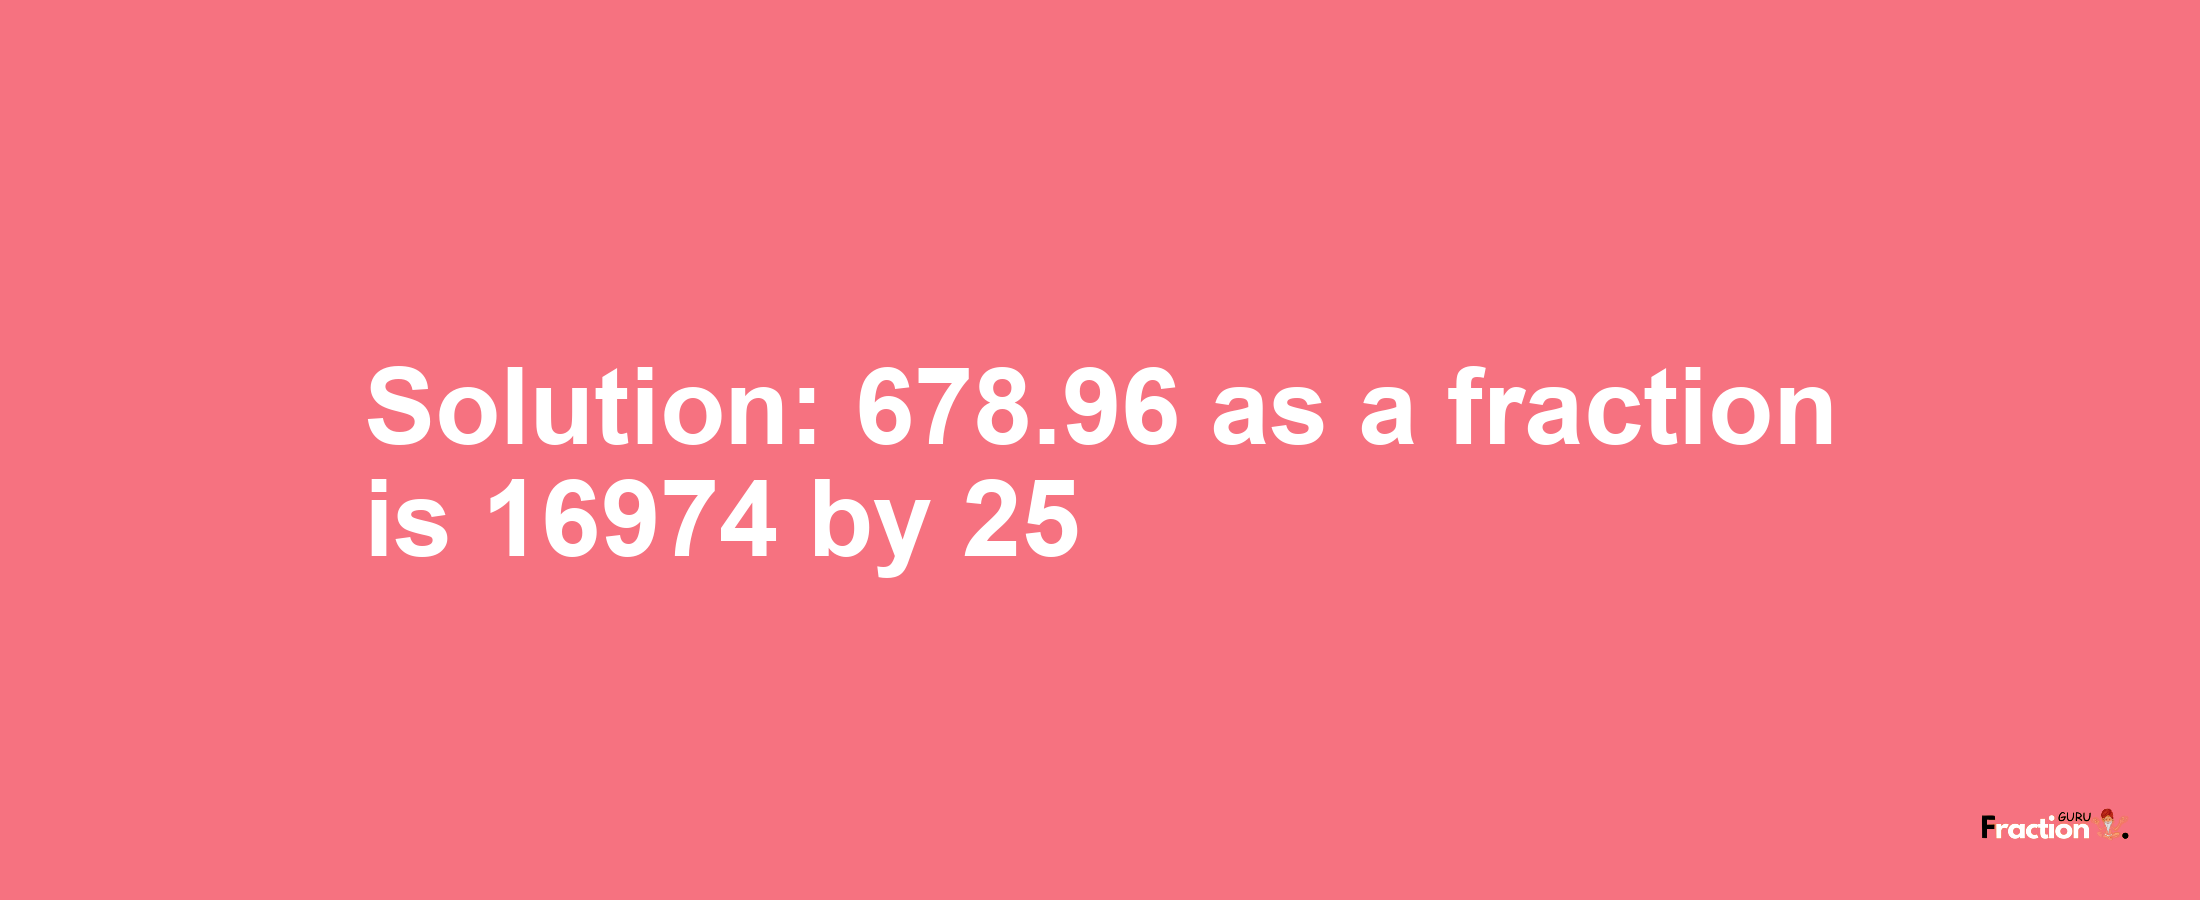 Solution:678.96 as a fraction is 16974/25